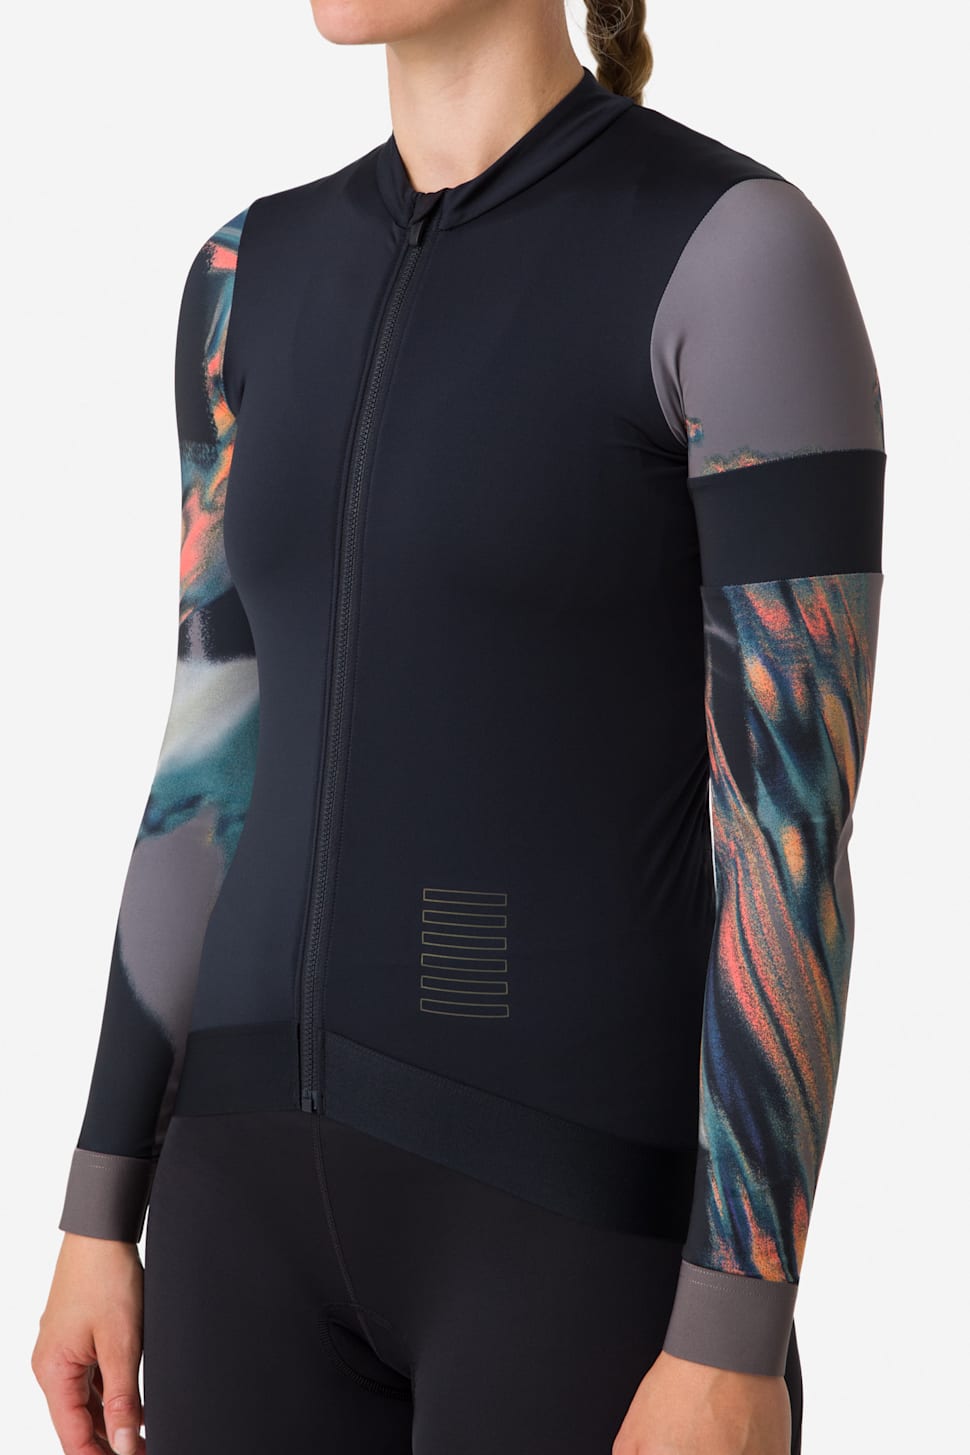 Women's Pro Team Long Sleeve Training Jersey - Transmit Collection